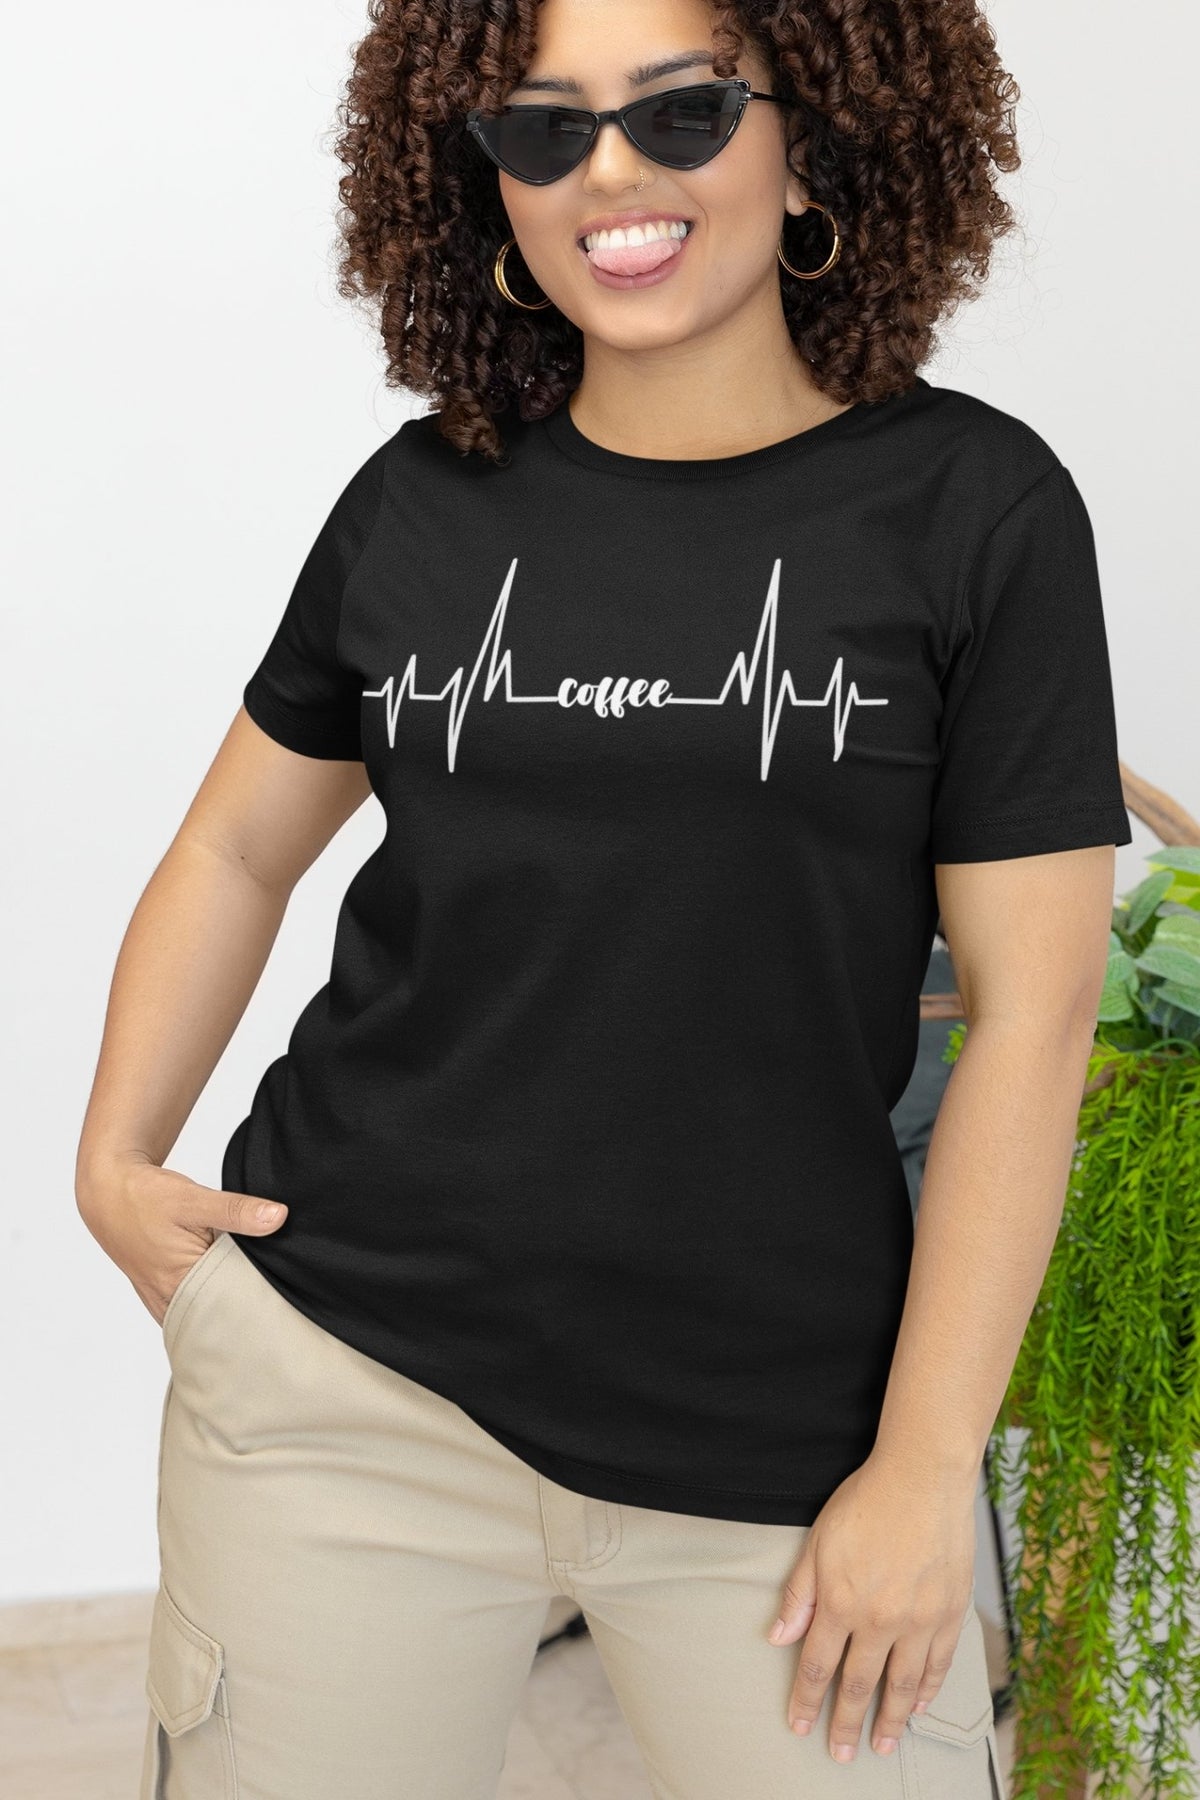 Coffee, The Heart Beat of America Women's Soft Style Tee - Salty Medic Clothing Co.